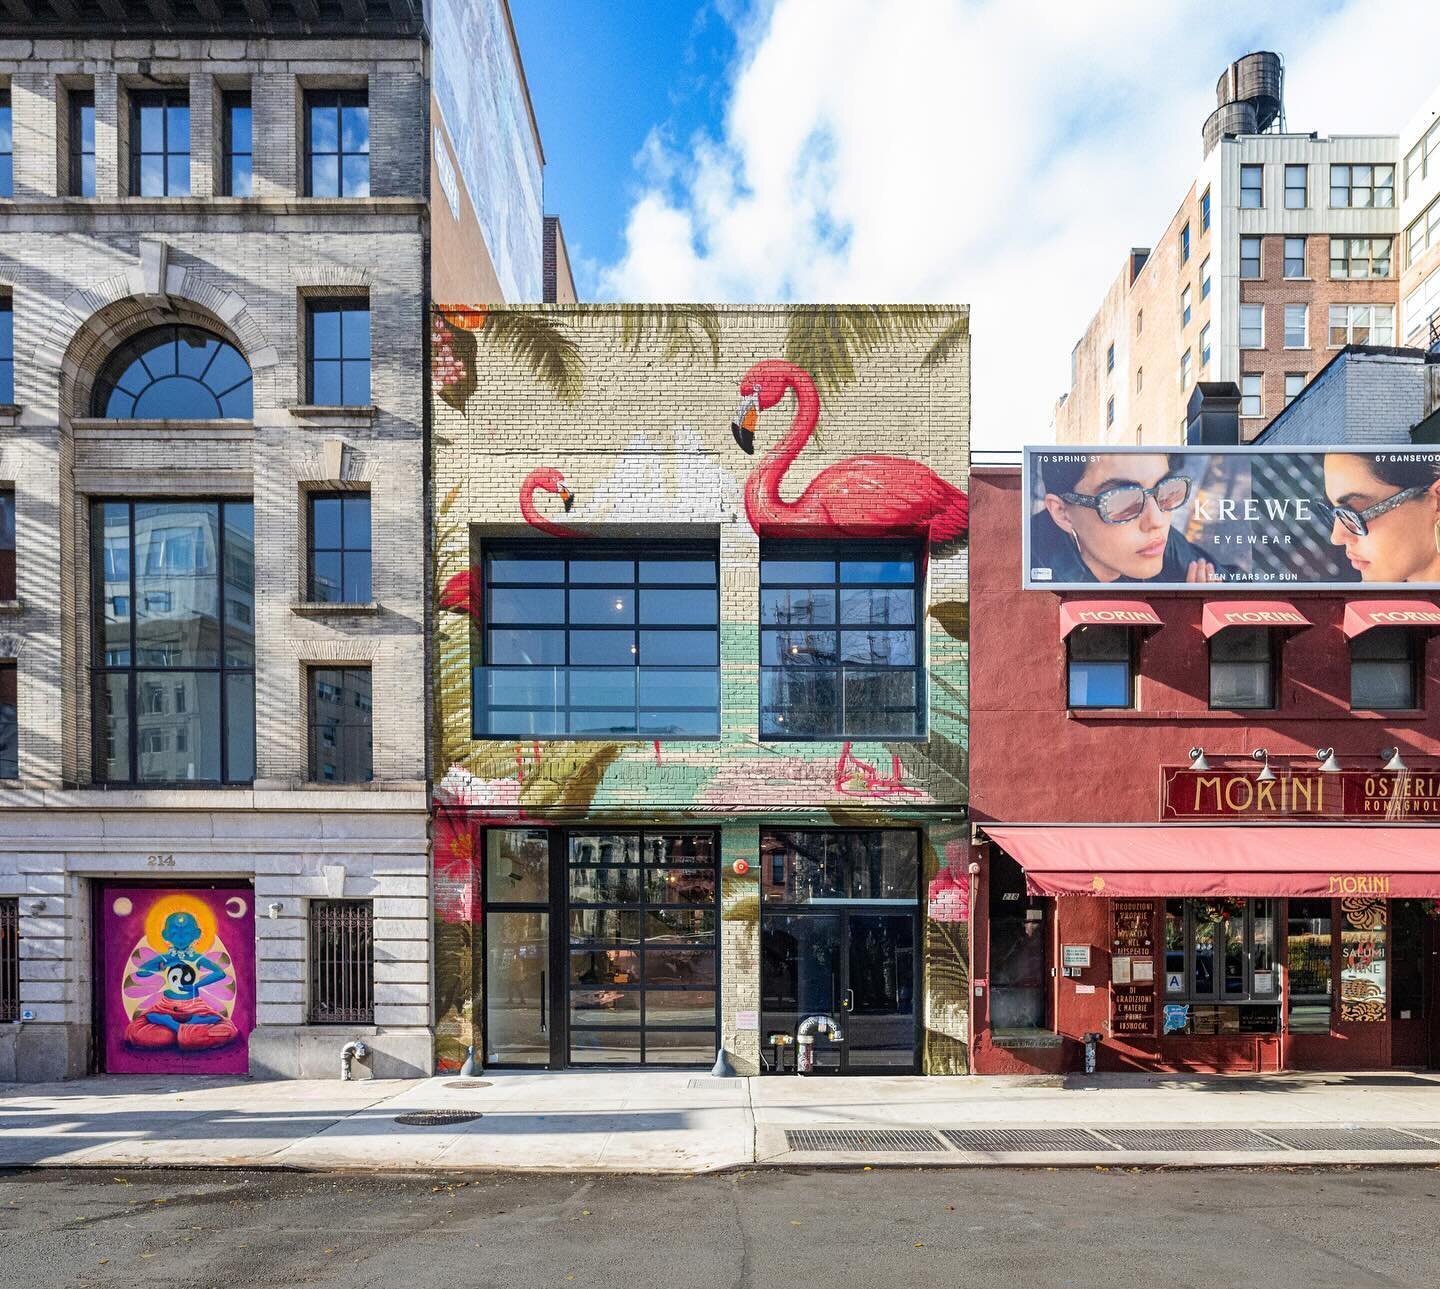 Finding a venue in NYC where you have complete freedom to brand the exterior is almost impossible, at ELM we love it when our clients use our facade as a canvas 🎨✨ Follow along to see our biggest transformation yet happening next week! ❤️

#nycvenue